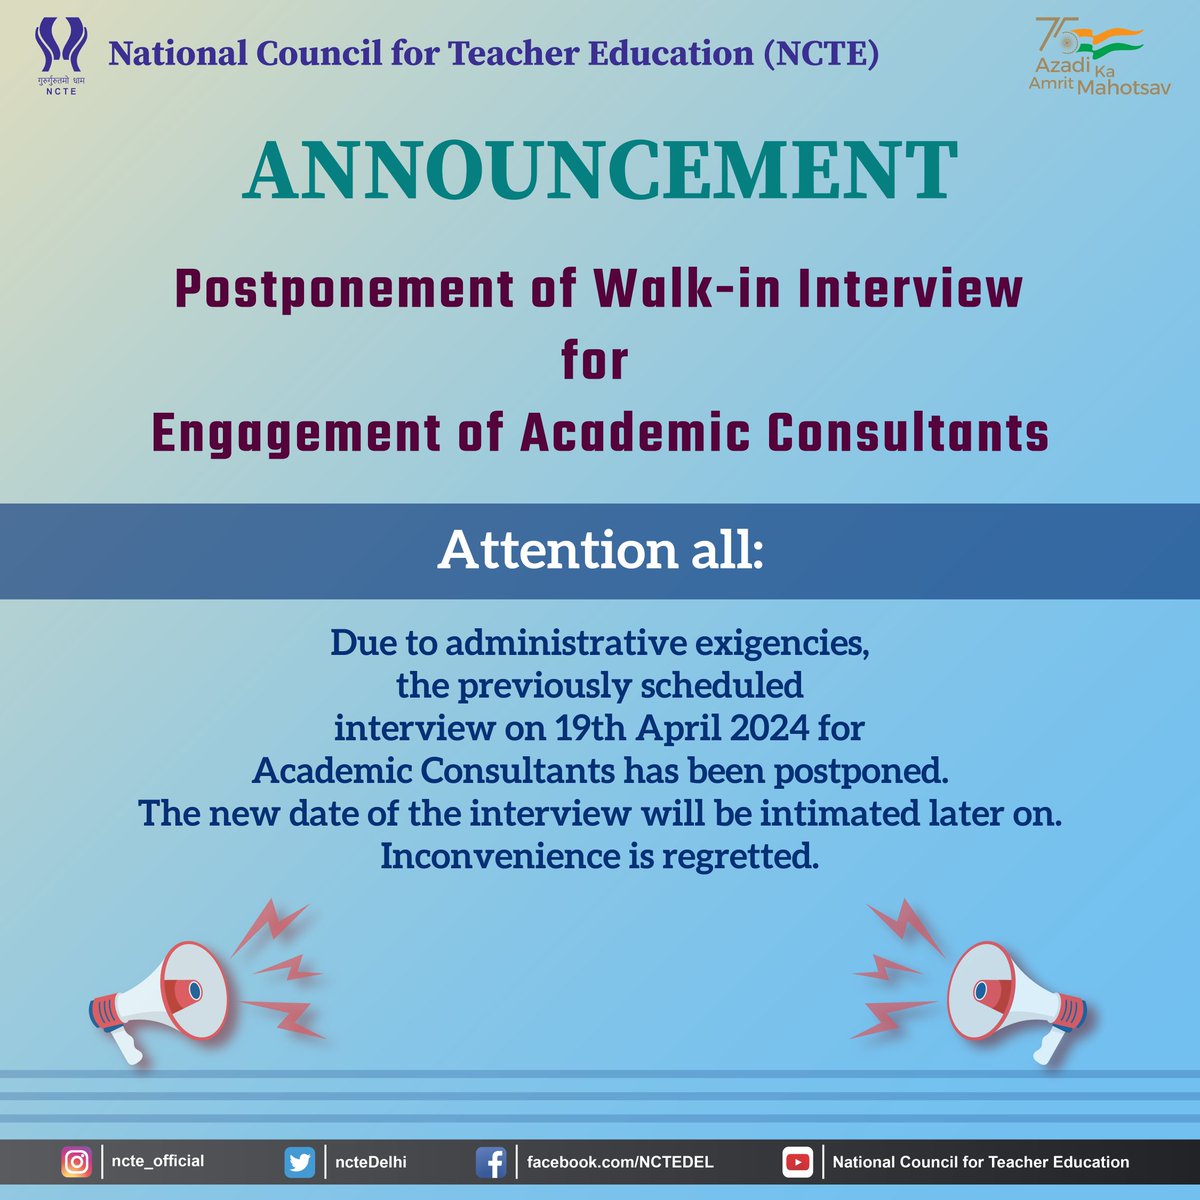 ‼️POSTPONED‼️ Please note that the Walk-in Interview for posts of Academic Consultants at NCTE, which was going to happen on 19.04.2024, has been postponed due to some administrative exigencies. It'll be rescheduled for a later date. Make sure you're following NCTE for updates.